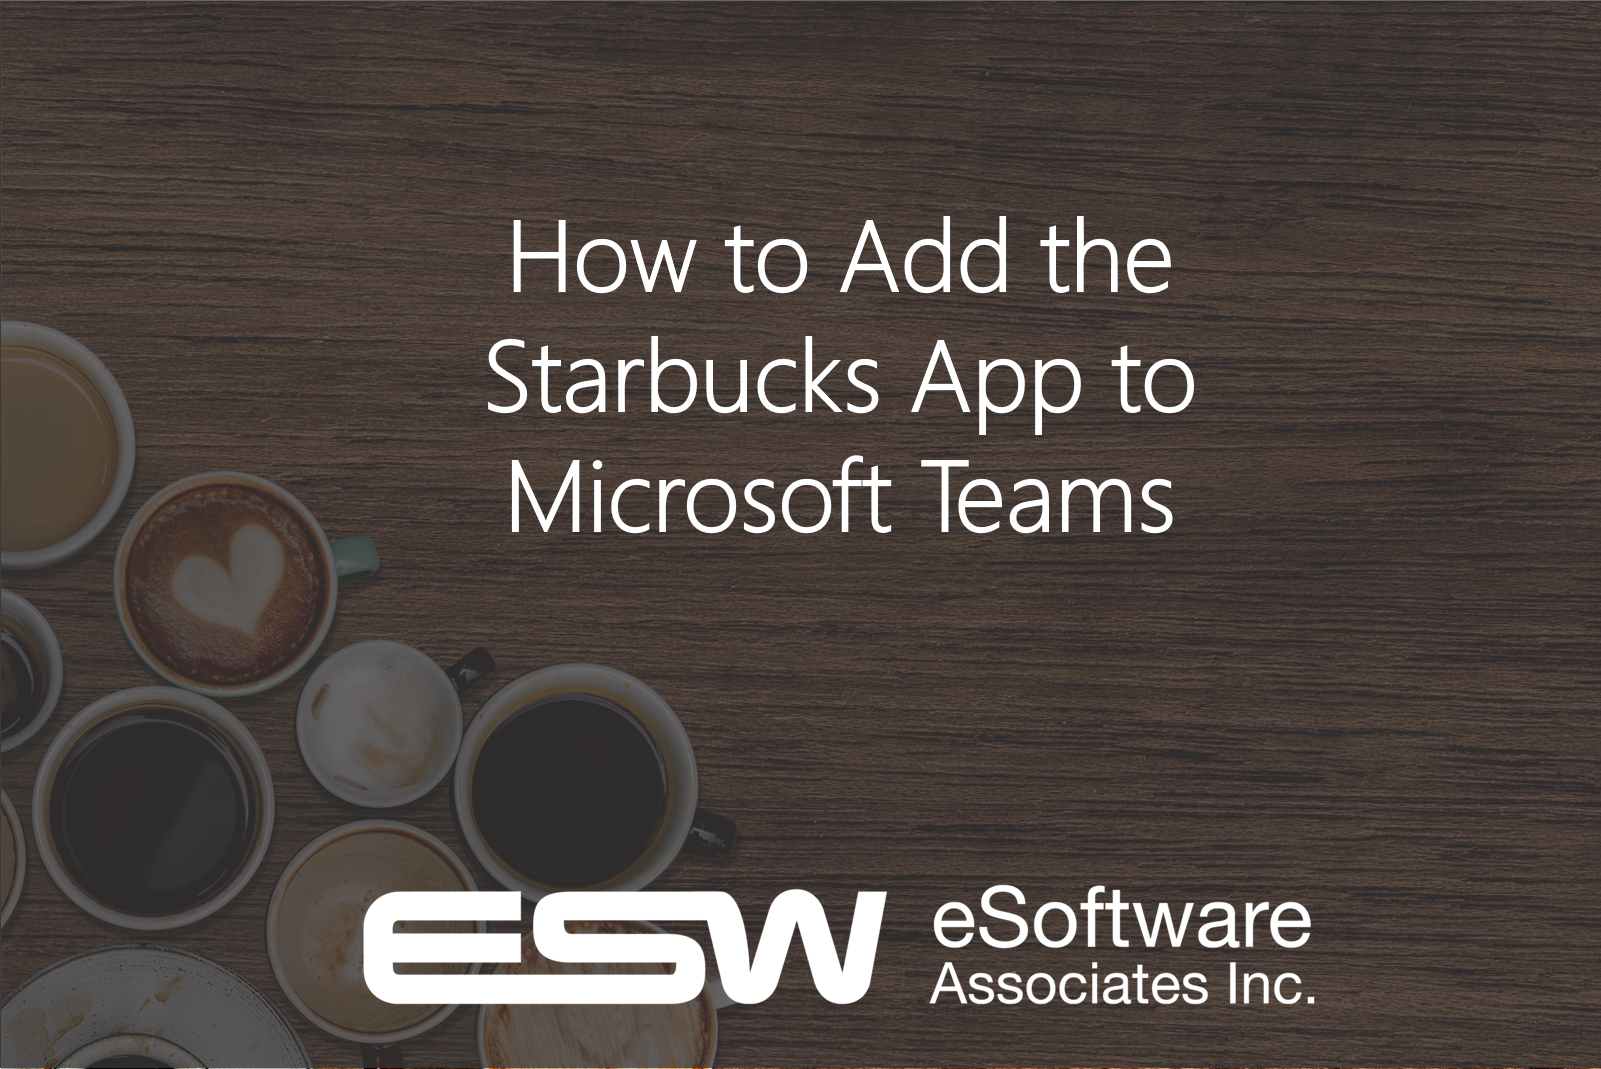 Learn How to Add the Starbucks App to Microsoft Teams